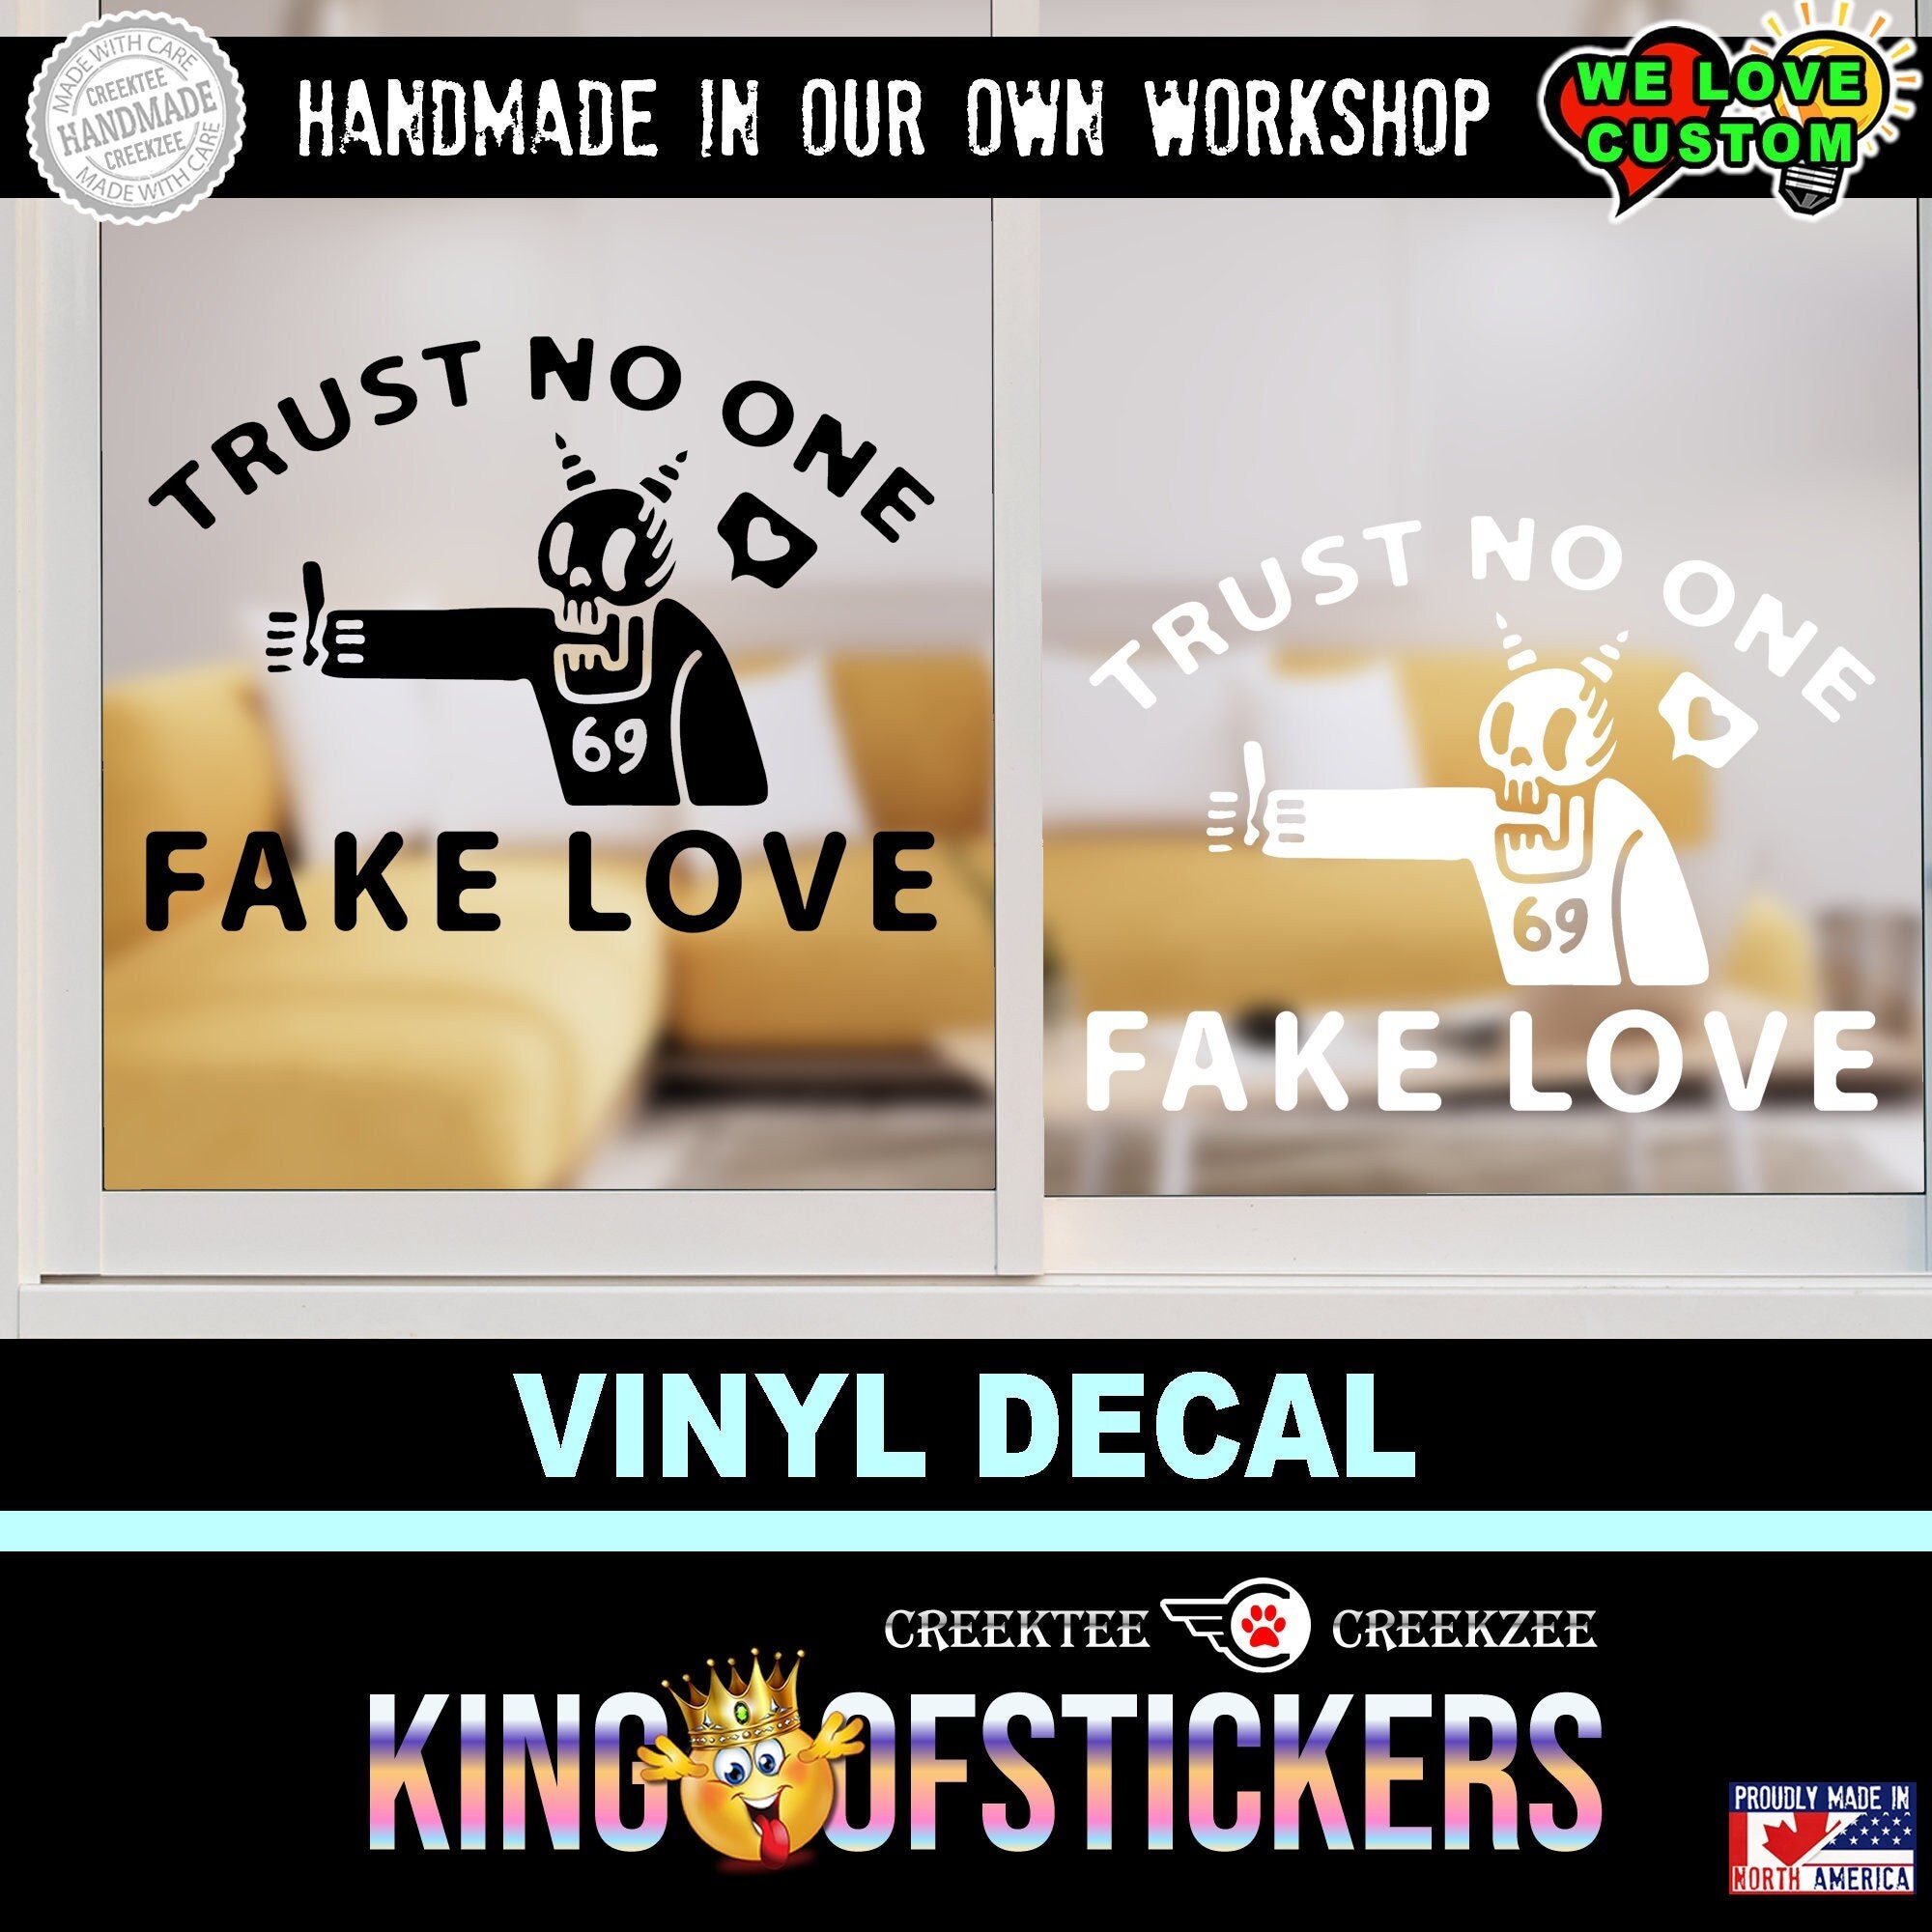 Fake Love Trust No One Vinyl Decal in various sizes and colors